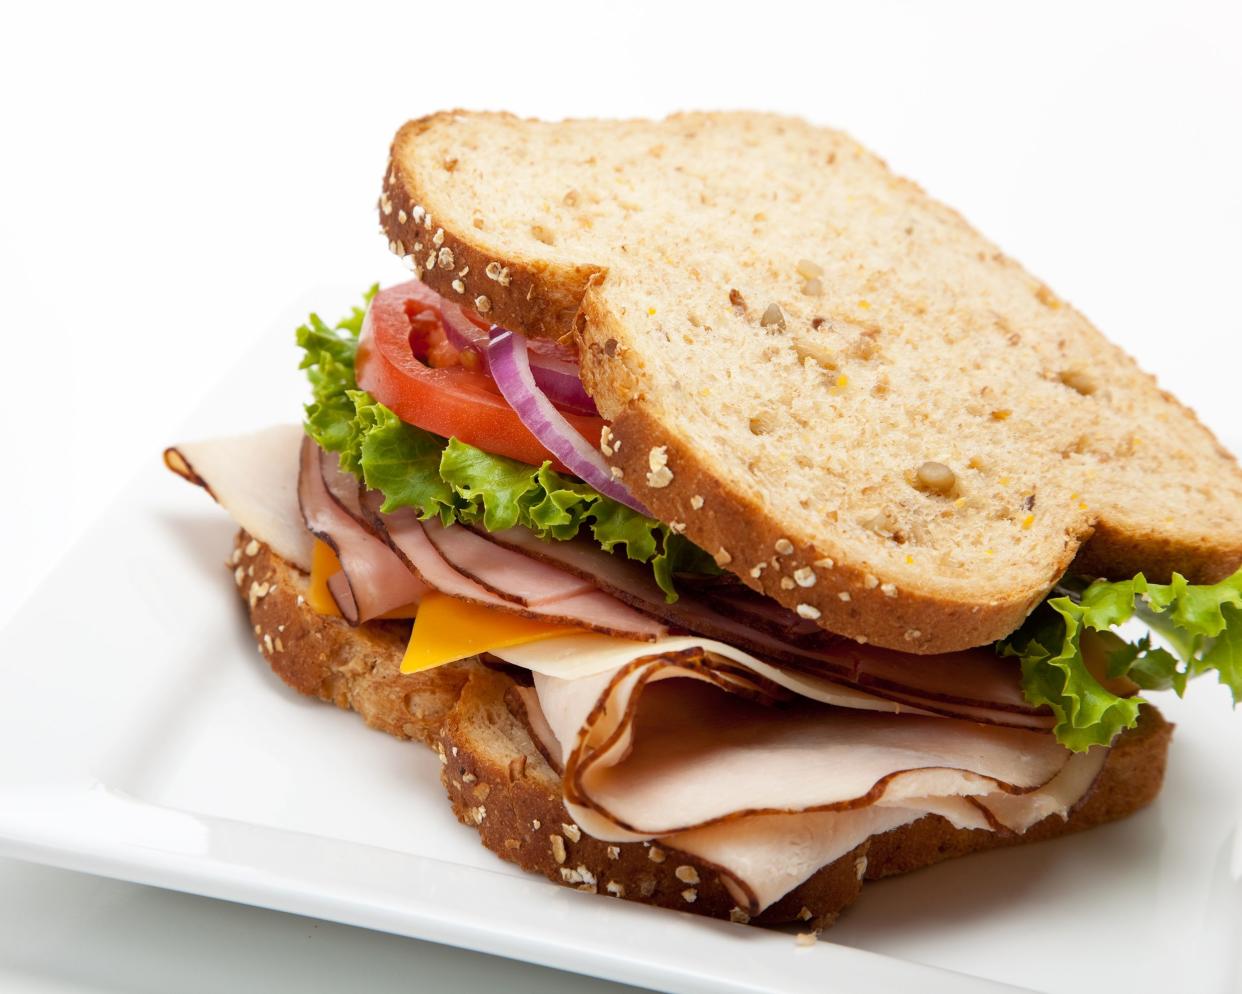 Deli sandwich with ham, cheddar cheese, lettuce, tomato, and onions on a square white porcelain plate on a white table and background